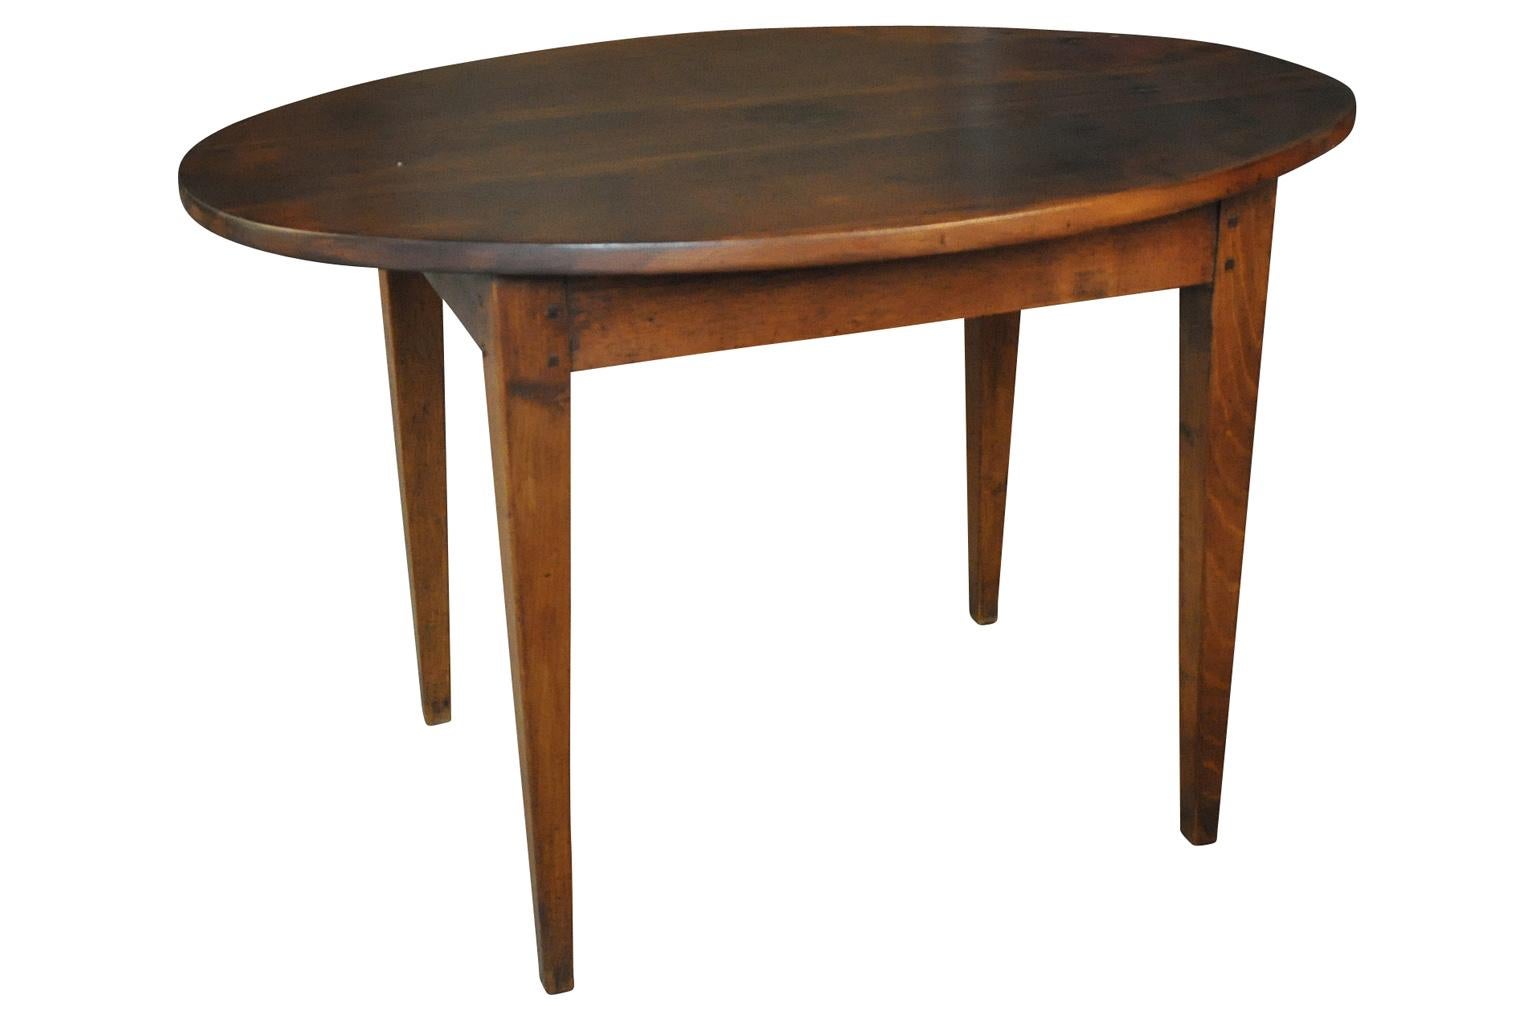 A very charming 19th century oval shaped side table from the Provence region of France. Wonderfully constructed from beautiful walnut with simple and elegant lines.